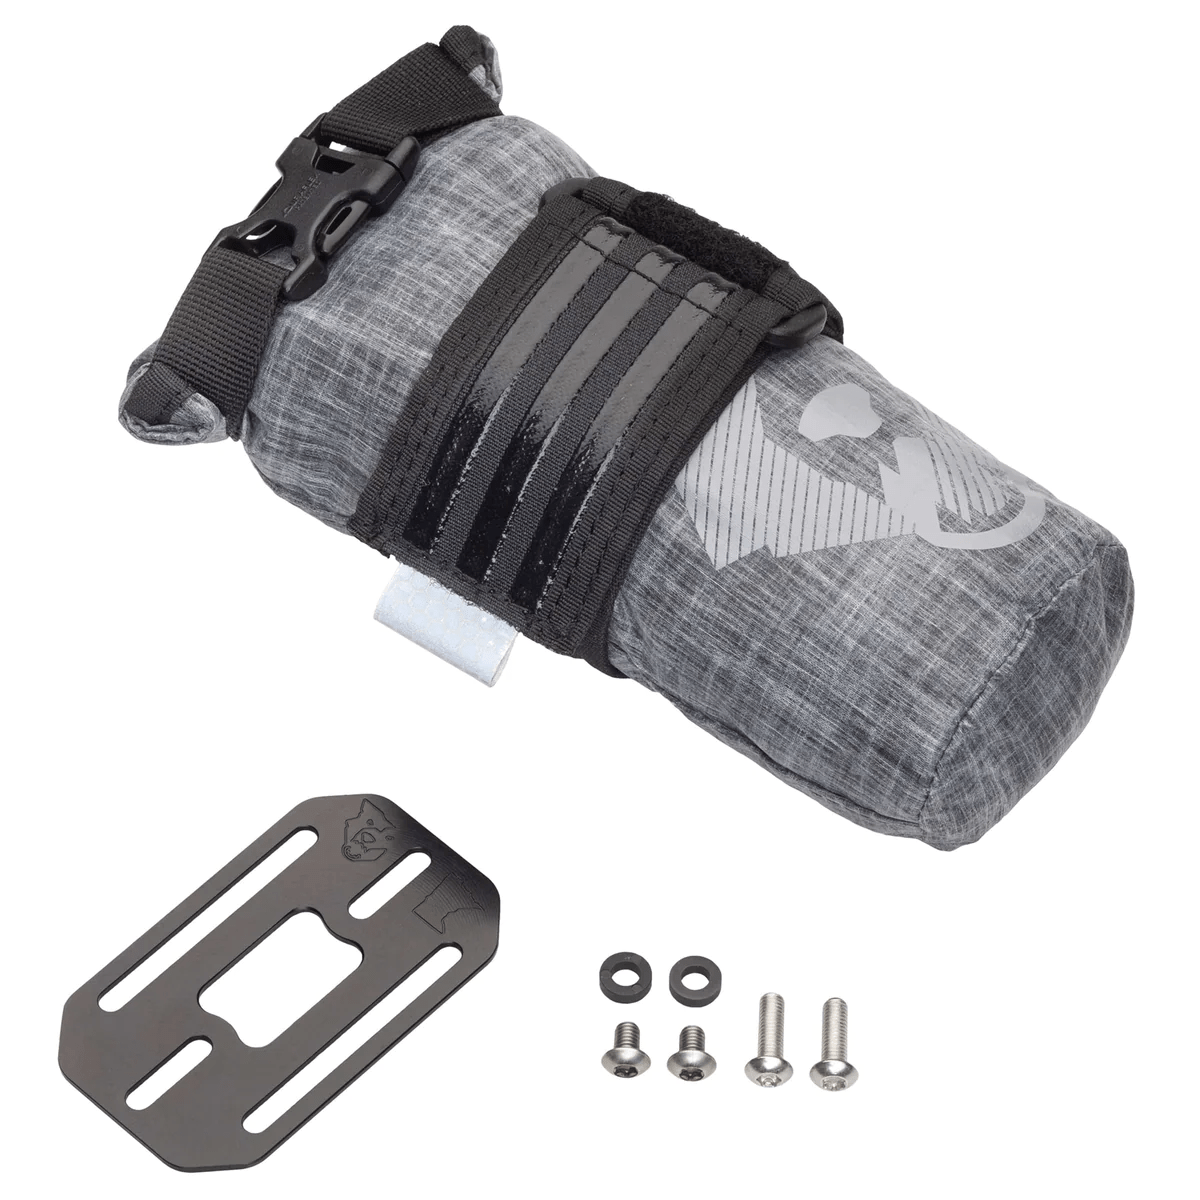 Wolf Tooth Components B-RAD TekLite Roll-Top Bag and Mounting Plate 0.6L Accessories - Bags - Accessory Bags & Straps